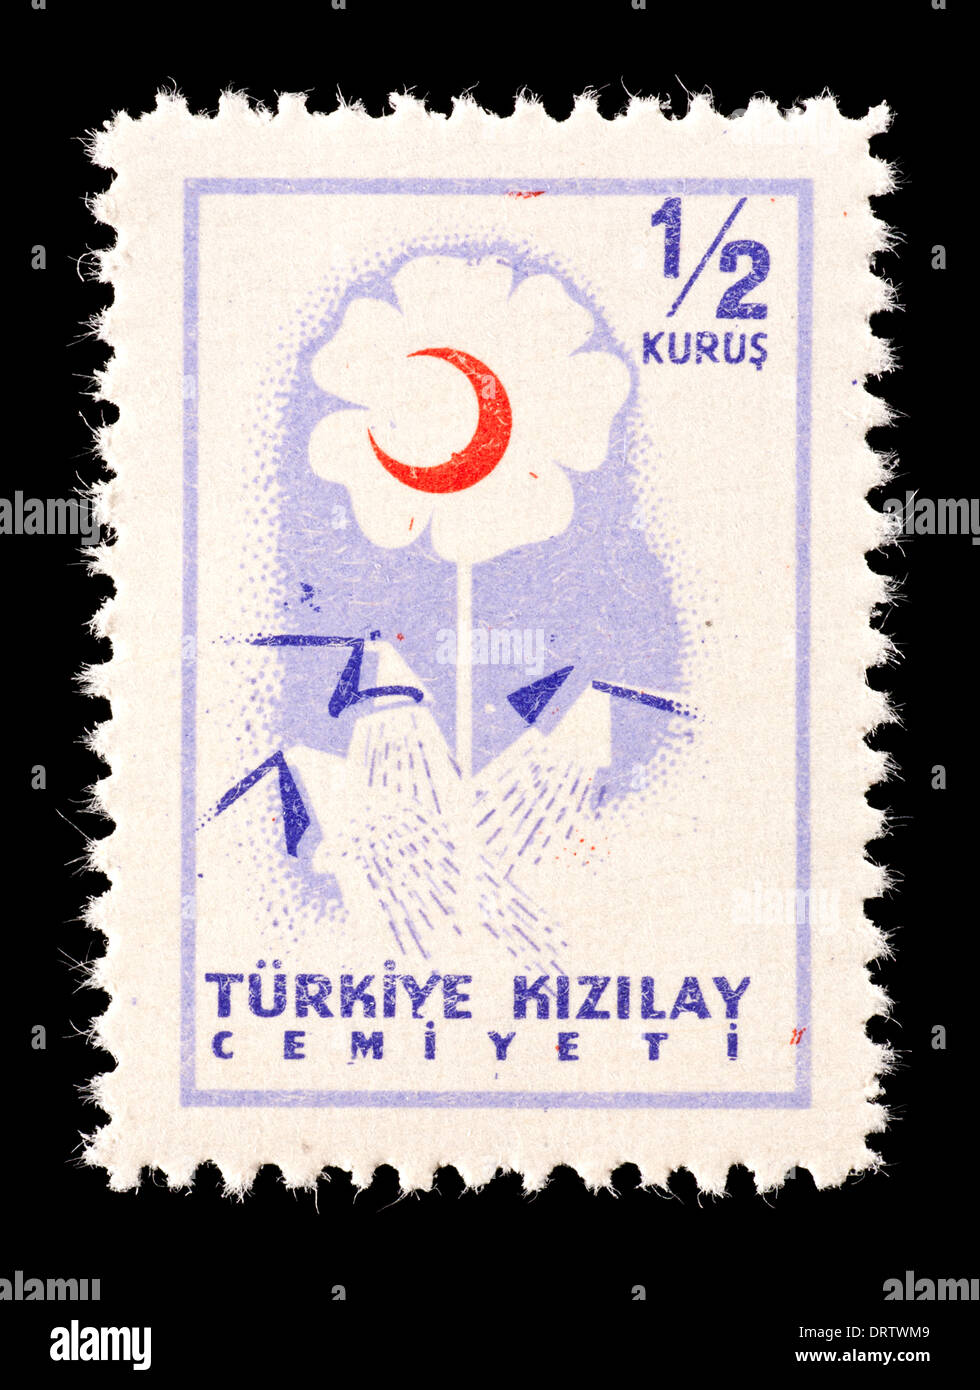 Postage tax stamp from Turkey depicting a flower and red crescent. Stock Photo